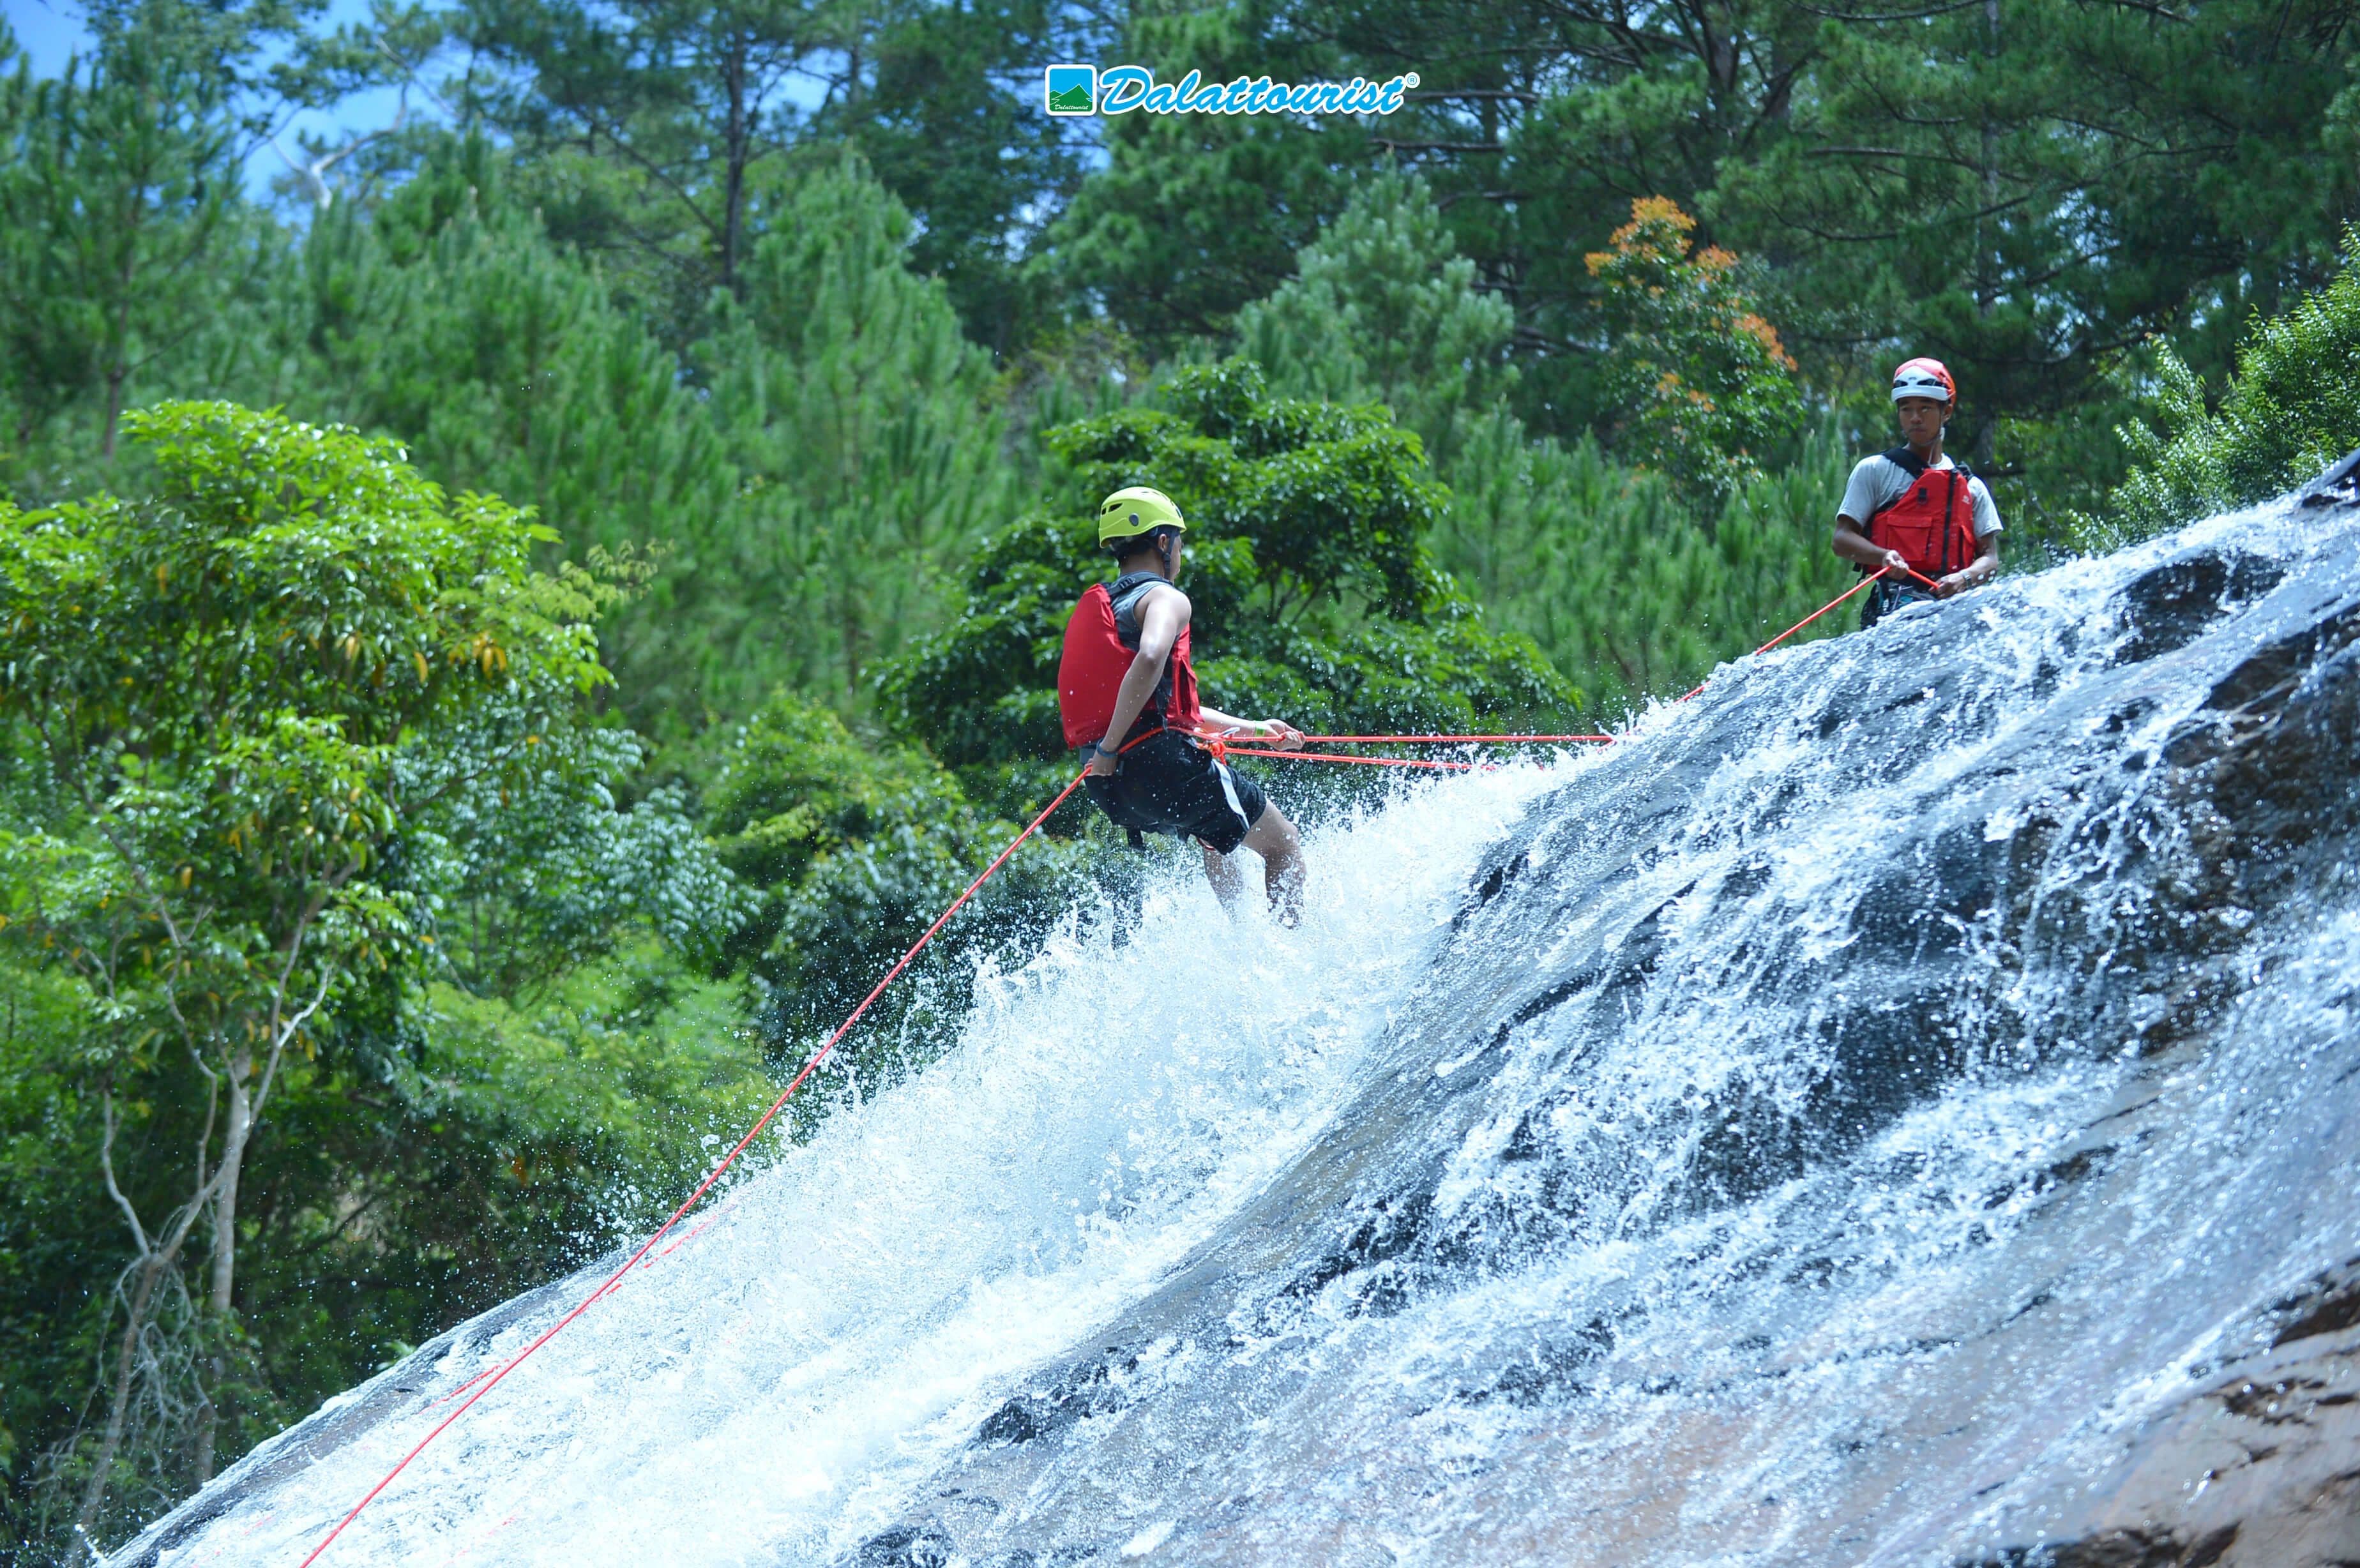 The tourist get stunning experience in waterfall abseiling in Kithulgala Sri Lanka